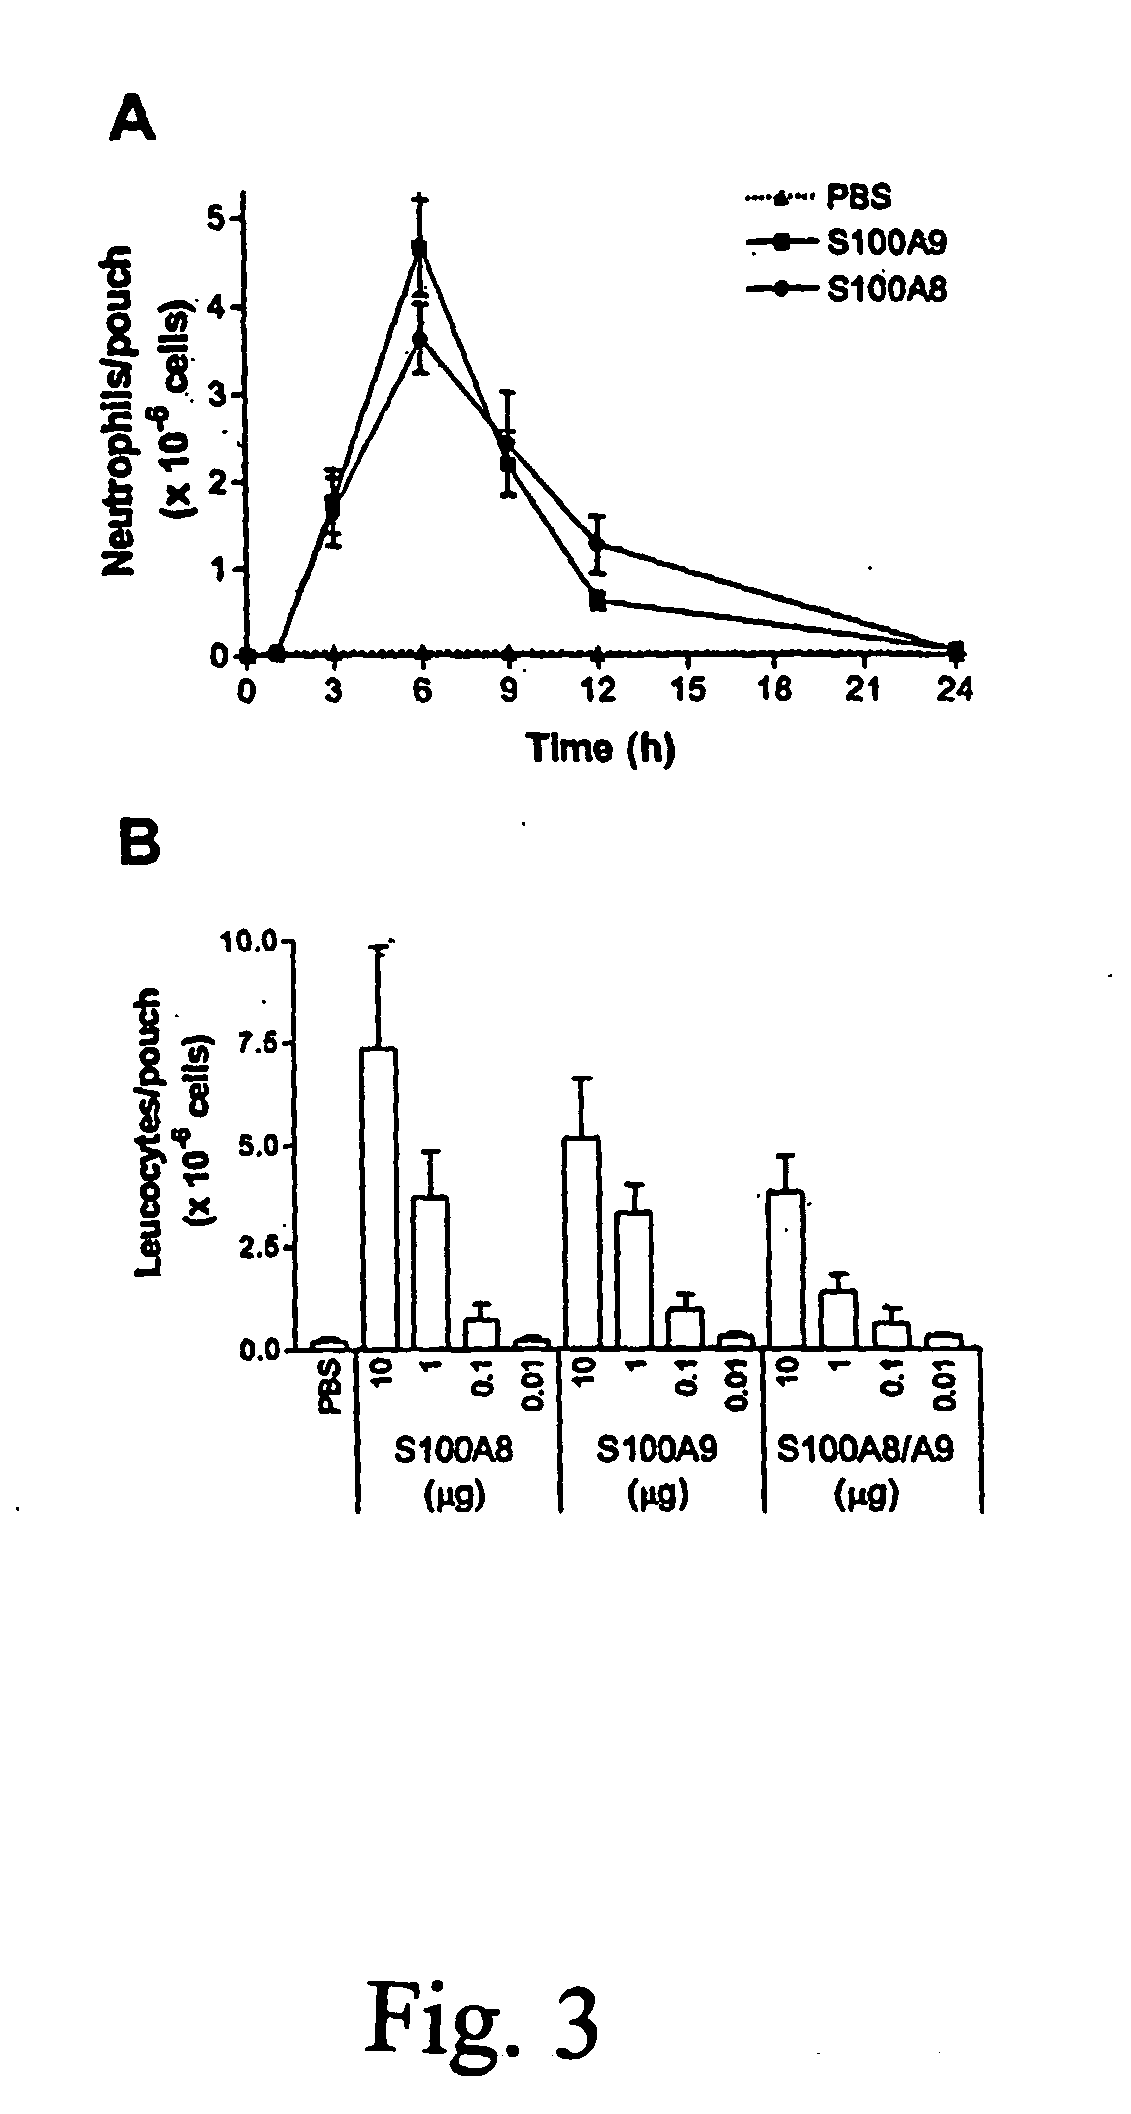 Chemotactic factor inhibitor for modulating inflammatory reactions